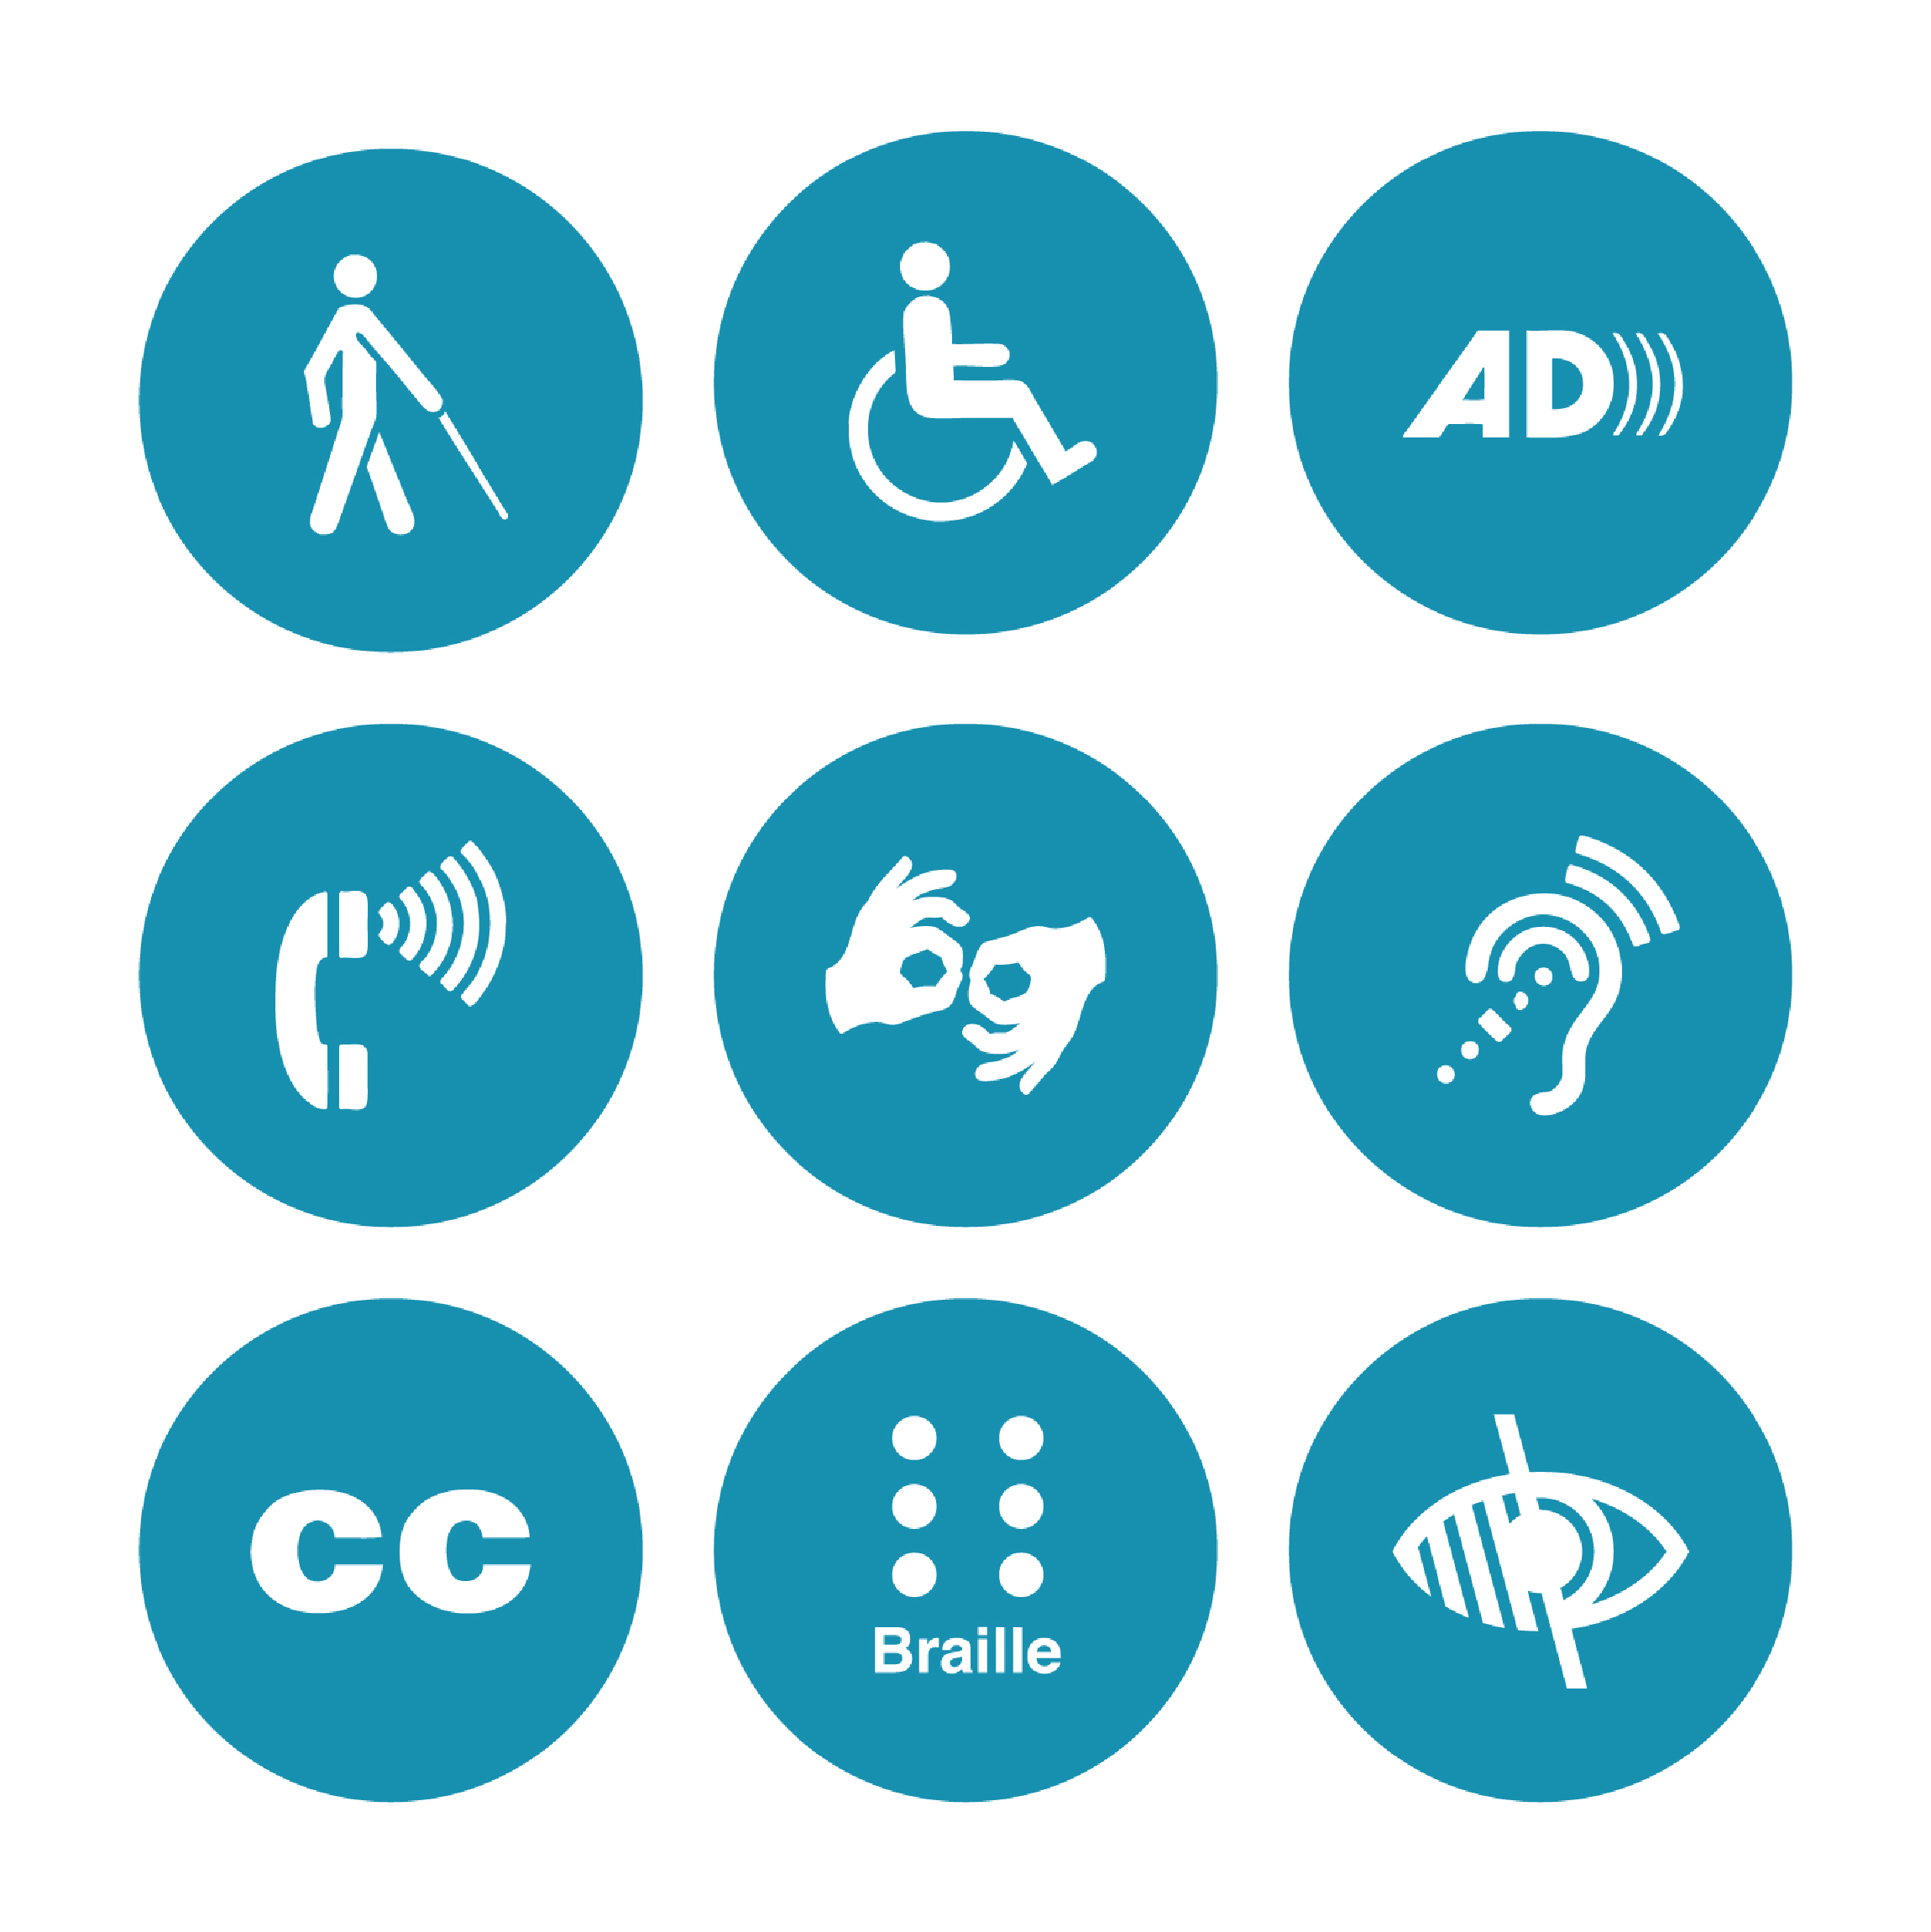 square made up of 9 circles with accessibility-related icons on each